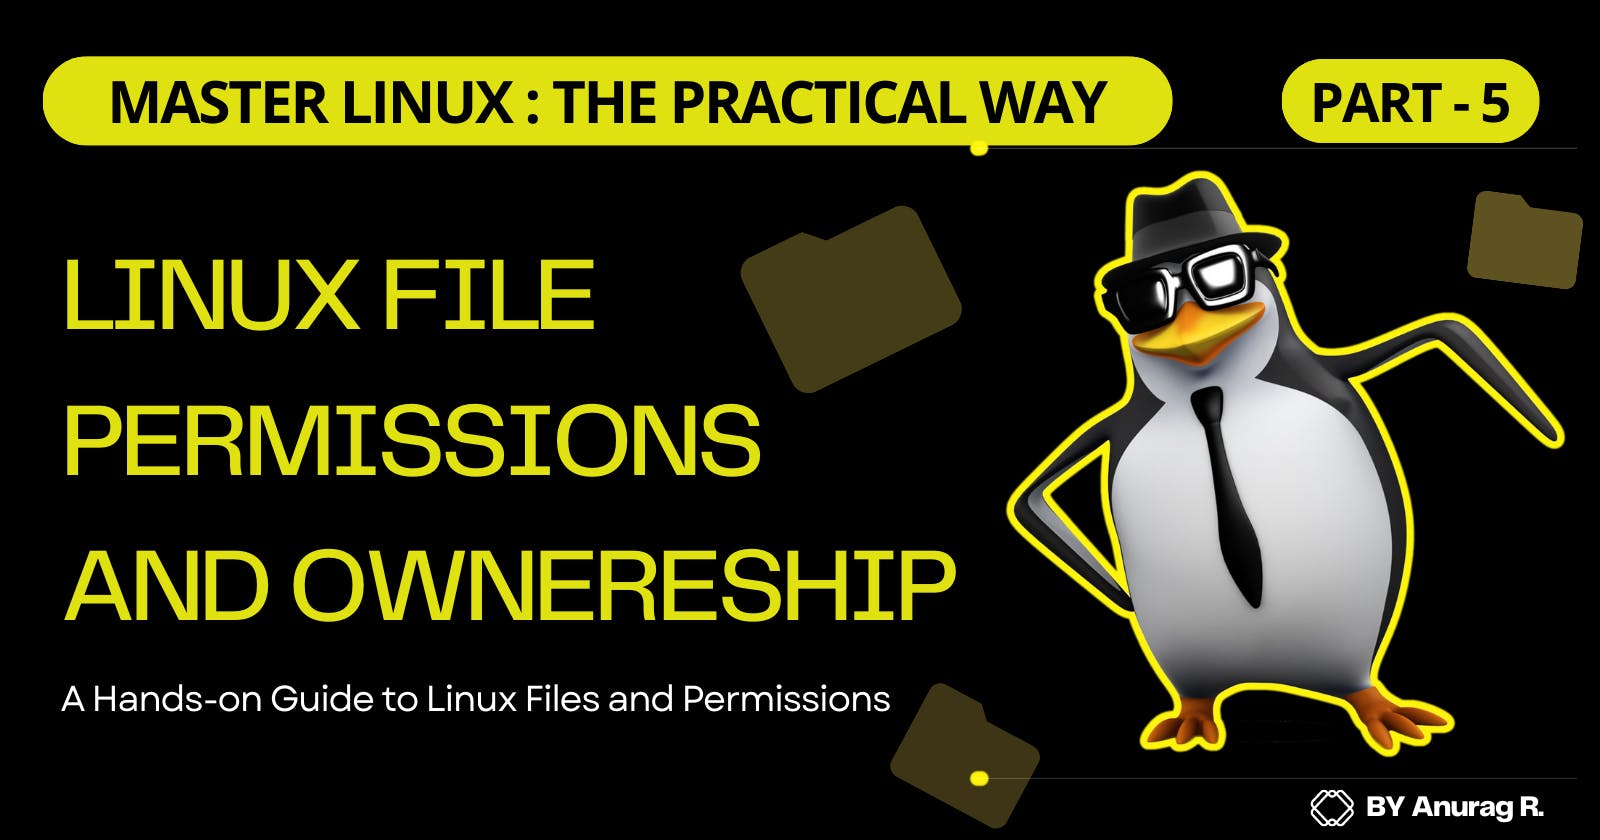 Linux File Permissions and Ownership